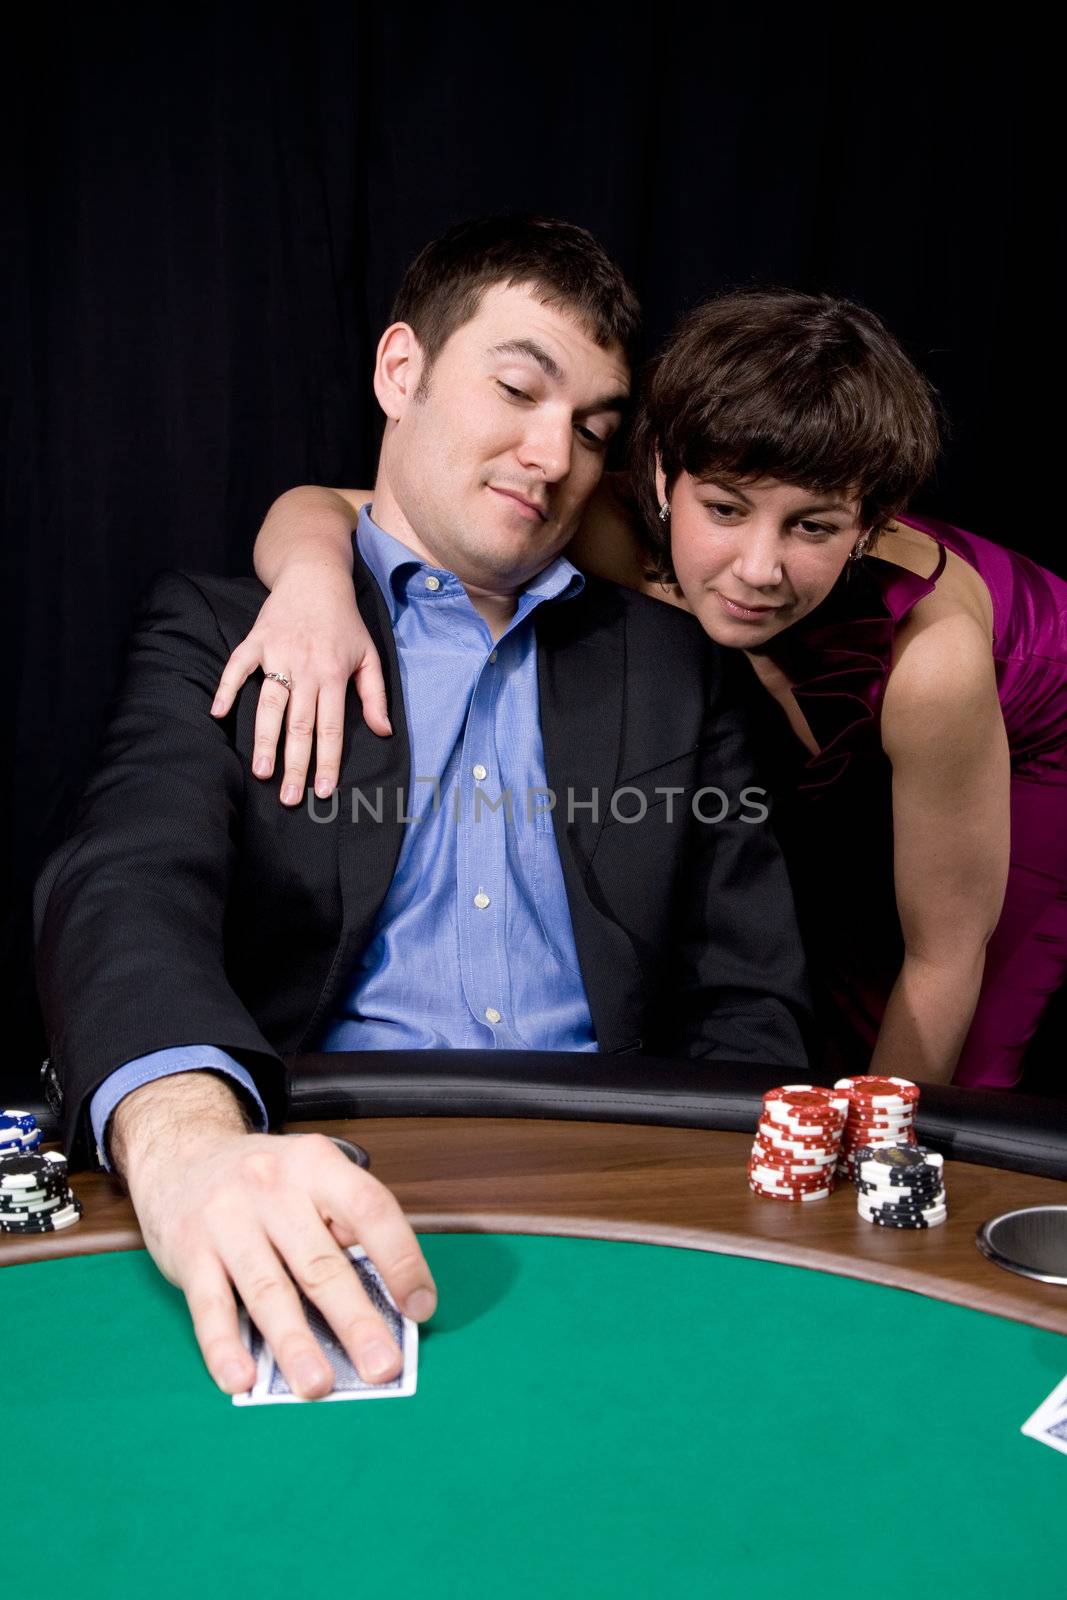 Couple in the casino playing poker on green felt